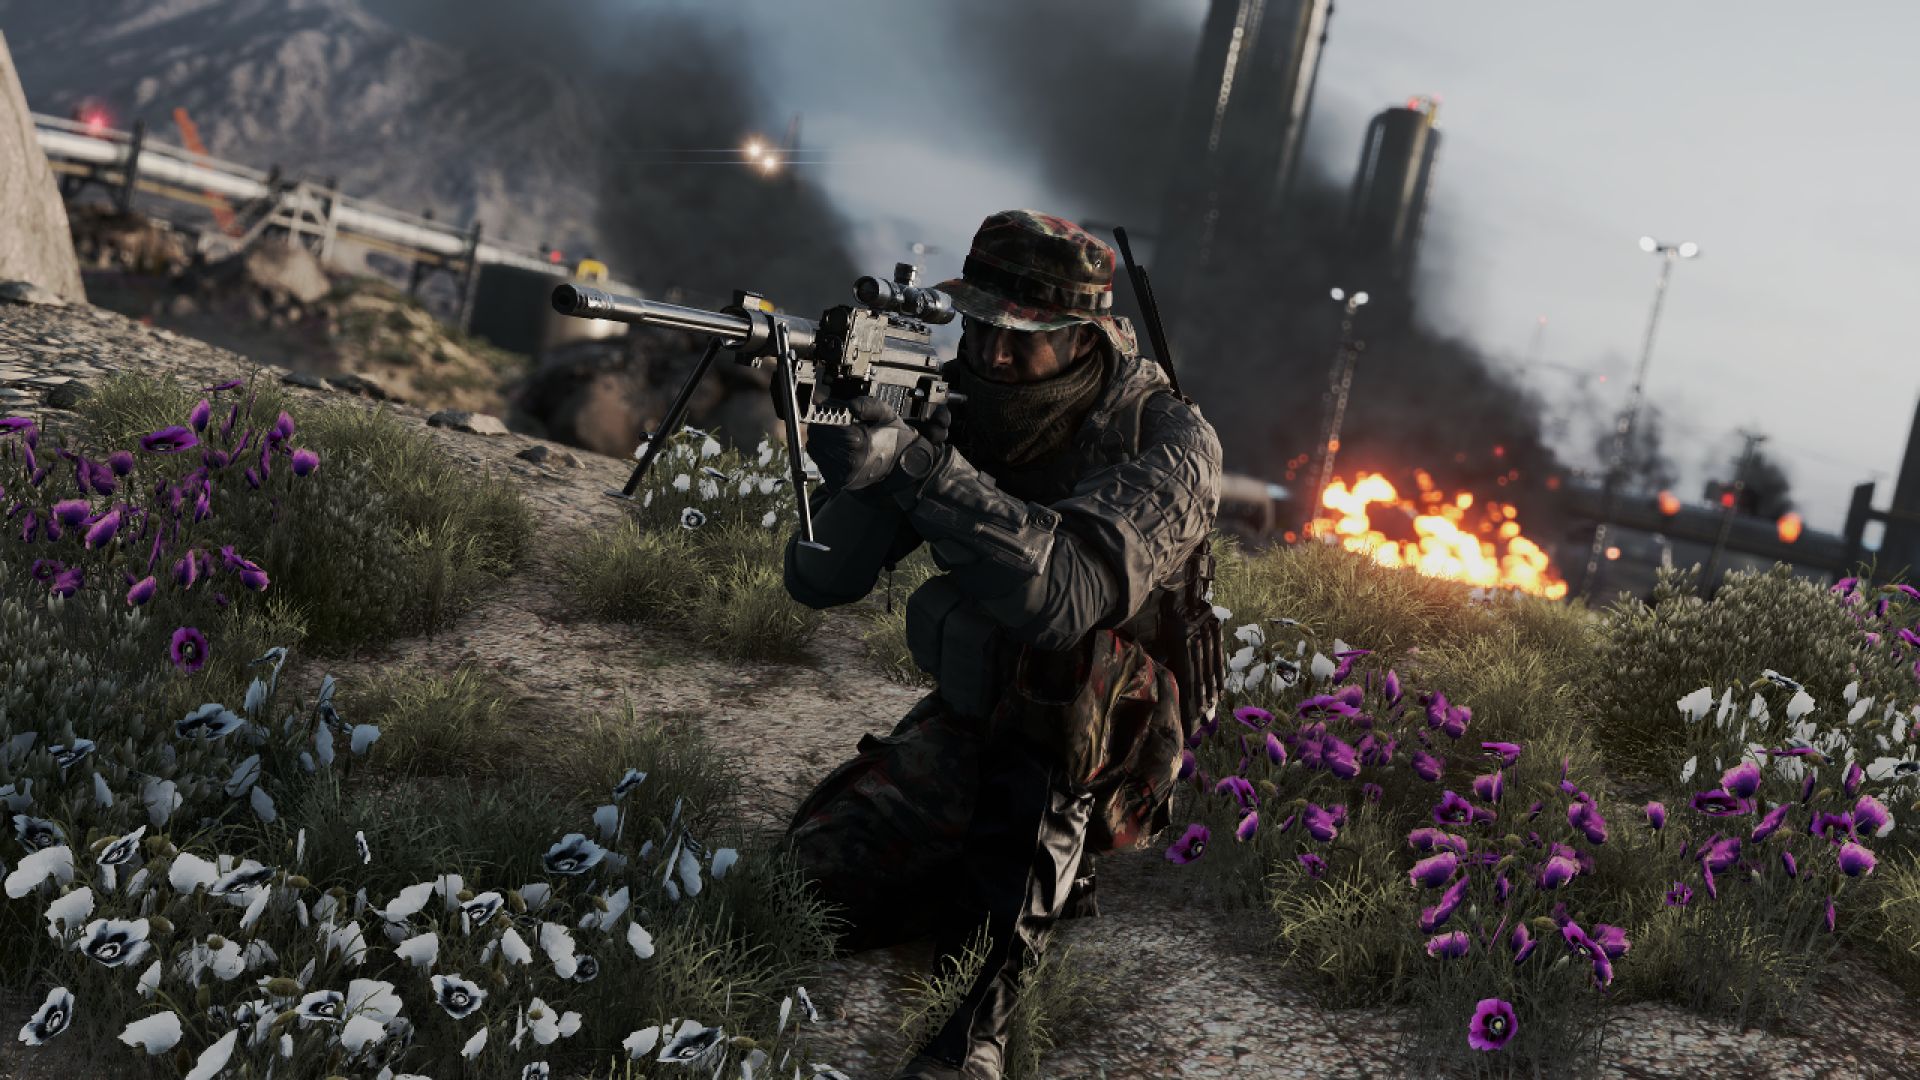 Image gallery for bf4 sniper wallpaper 1920x1080